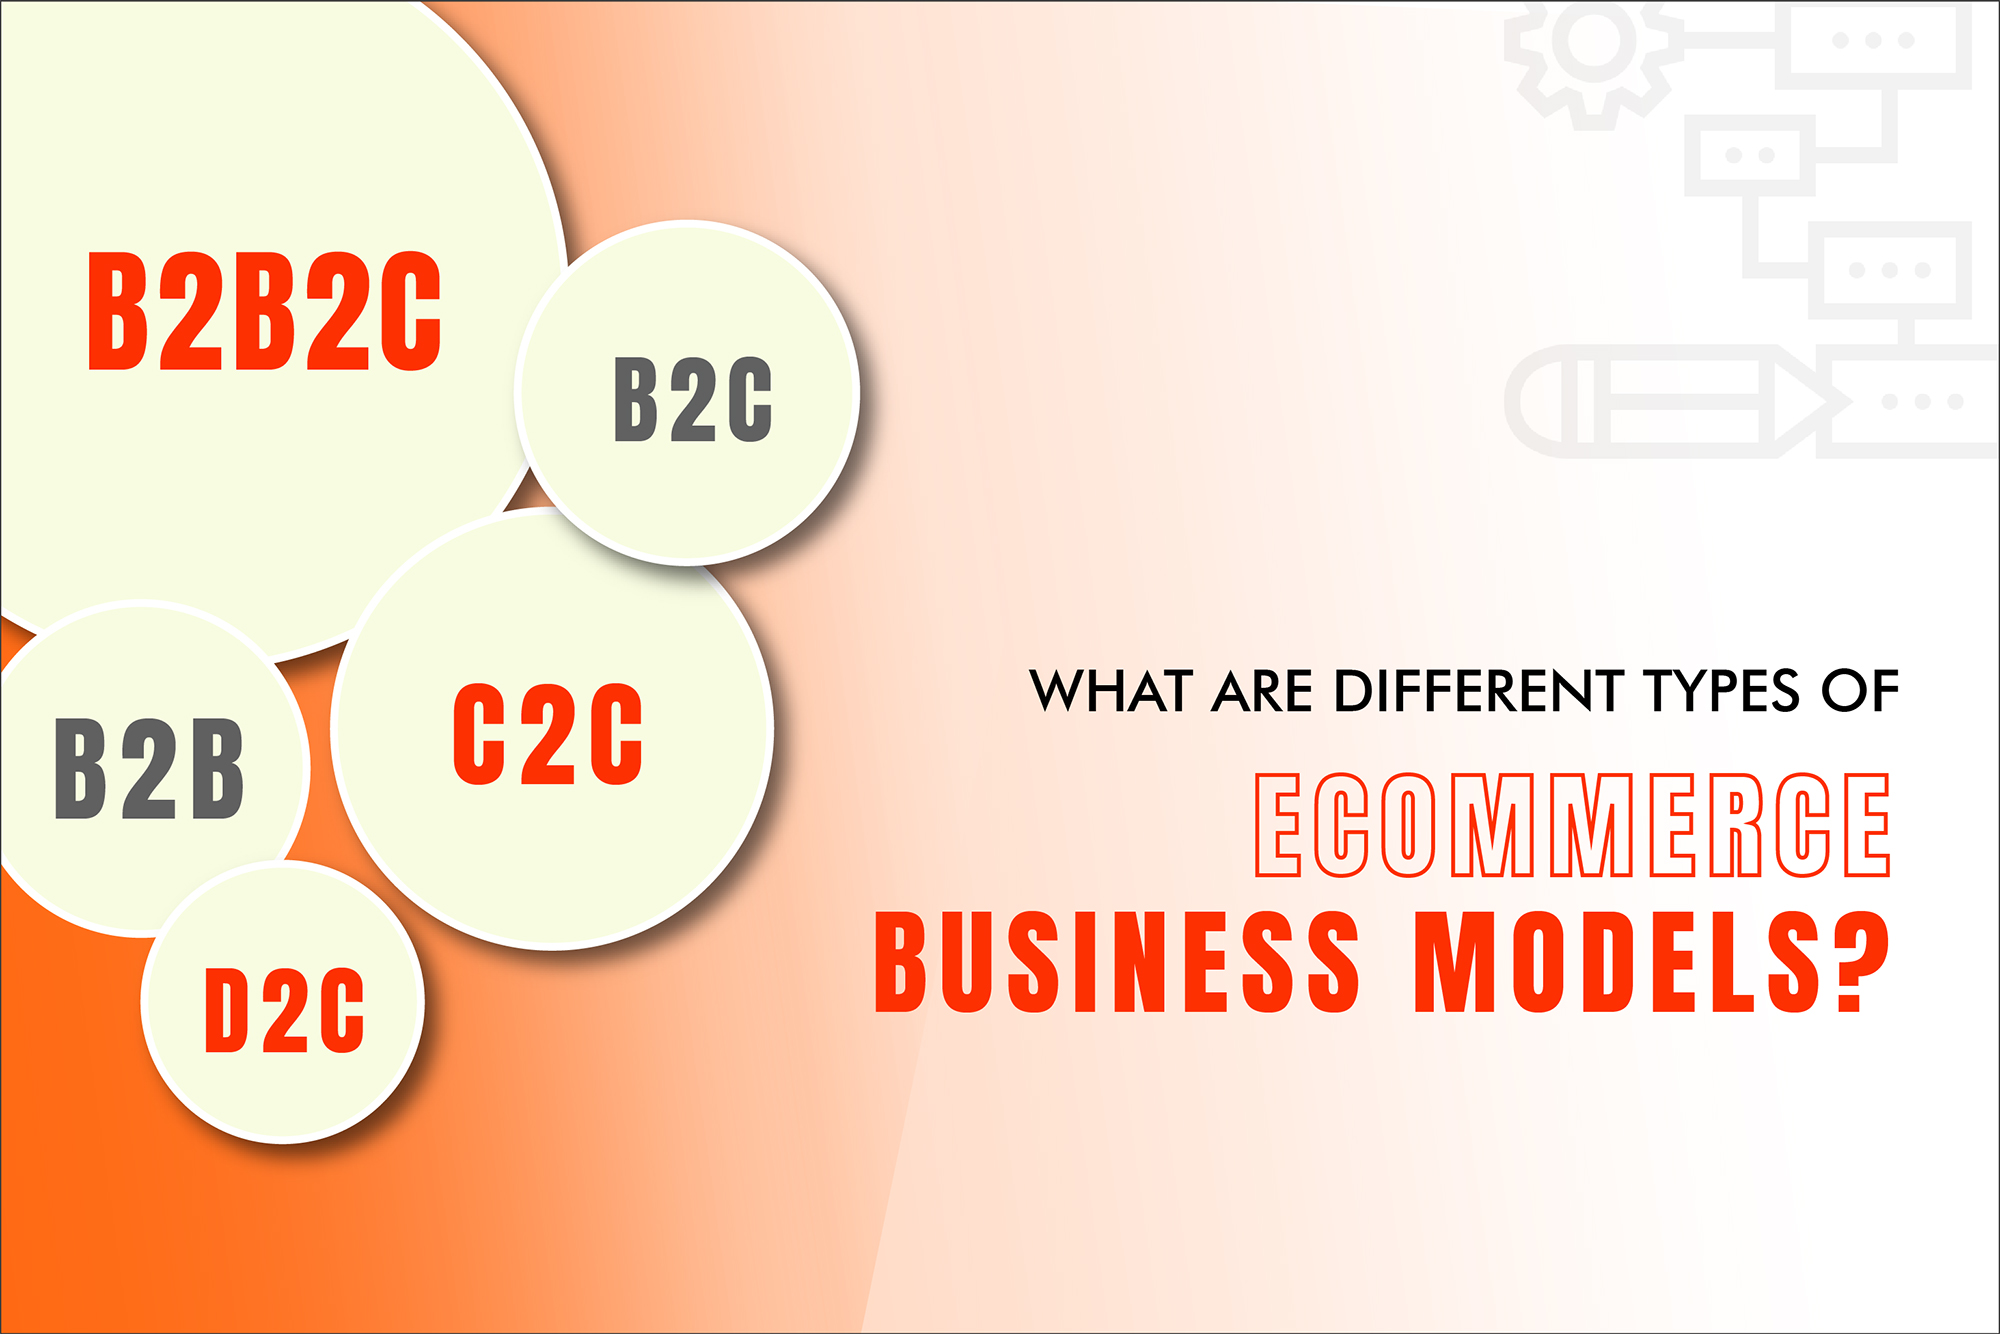 What are the different types of e-commerce business models?